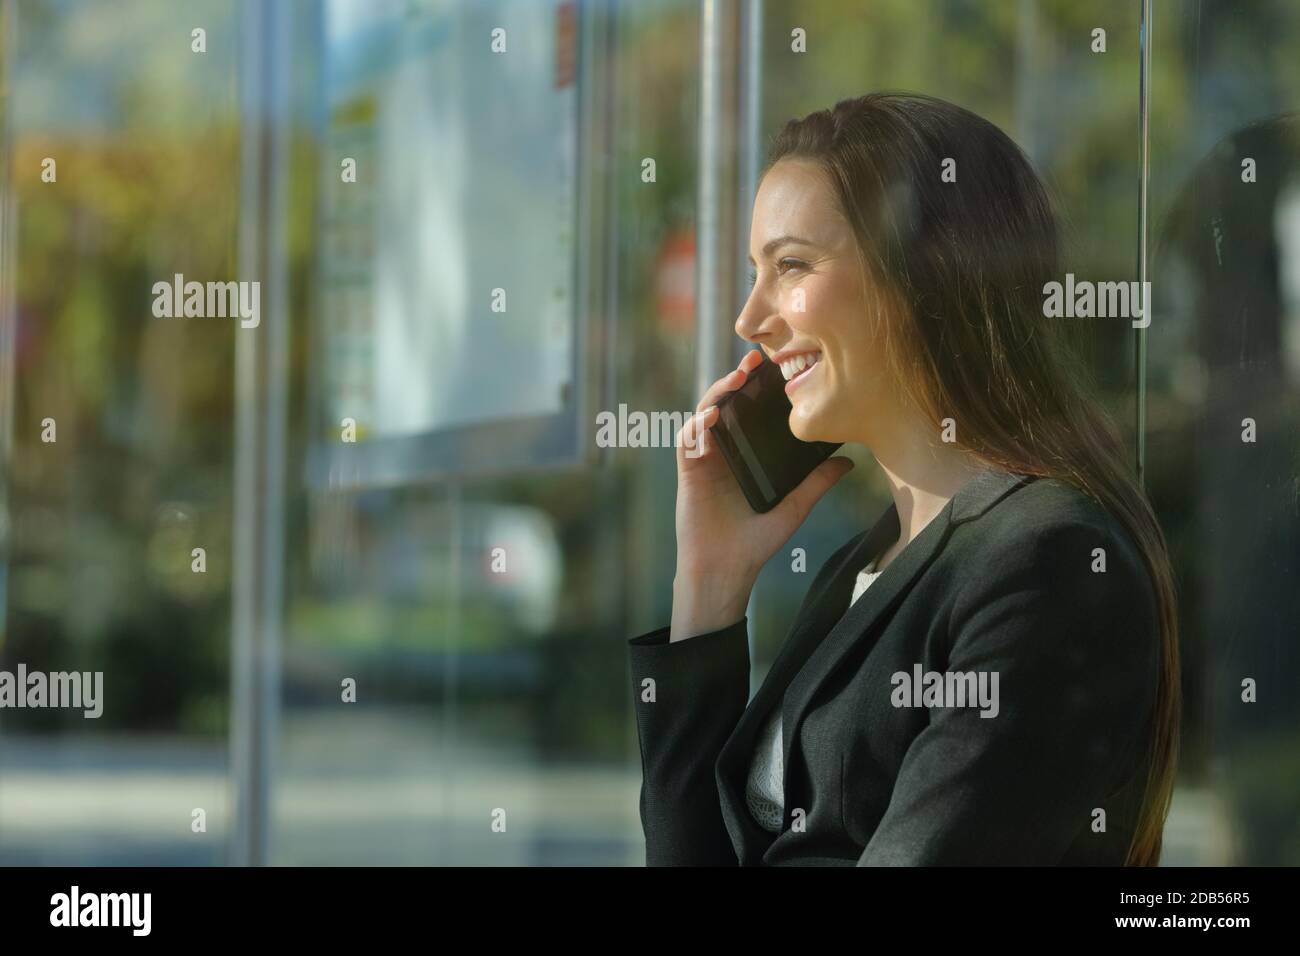 Profle of a happy executive woman talking on smart phone waiting on a bus stop Stock Photo